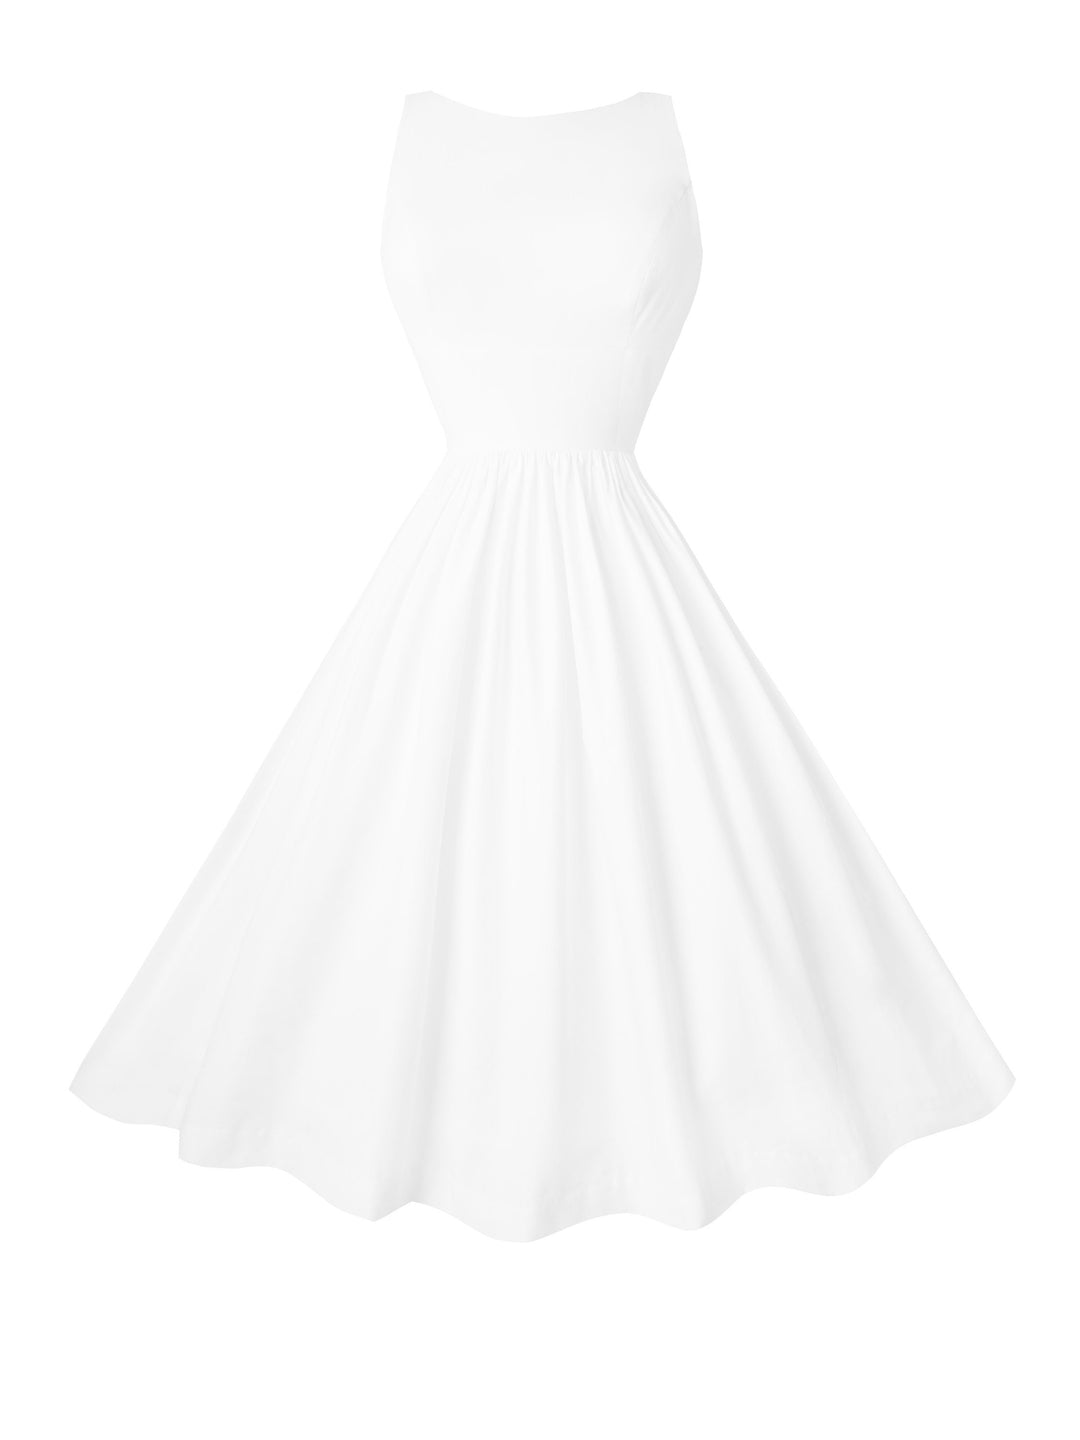 RTS - MULTI SIZE - Madeline Dress in White Cotton